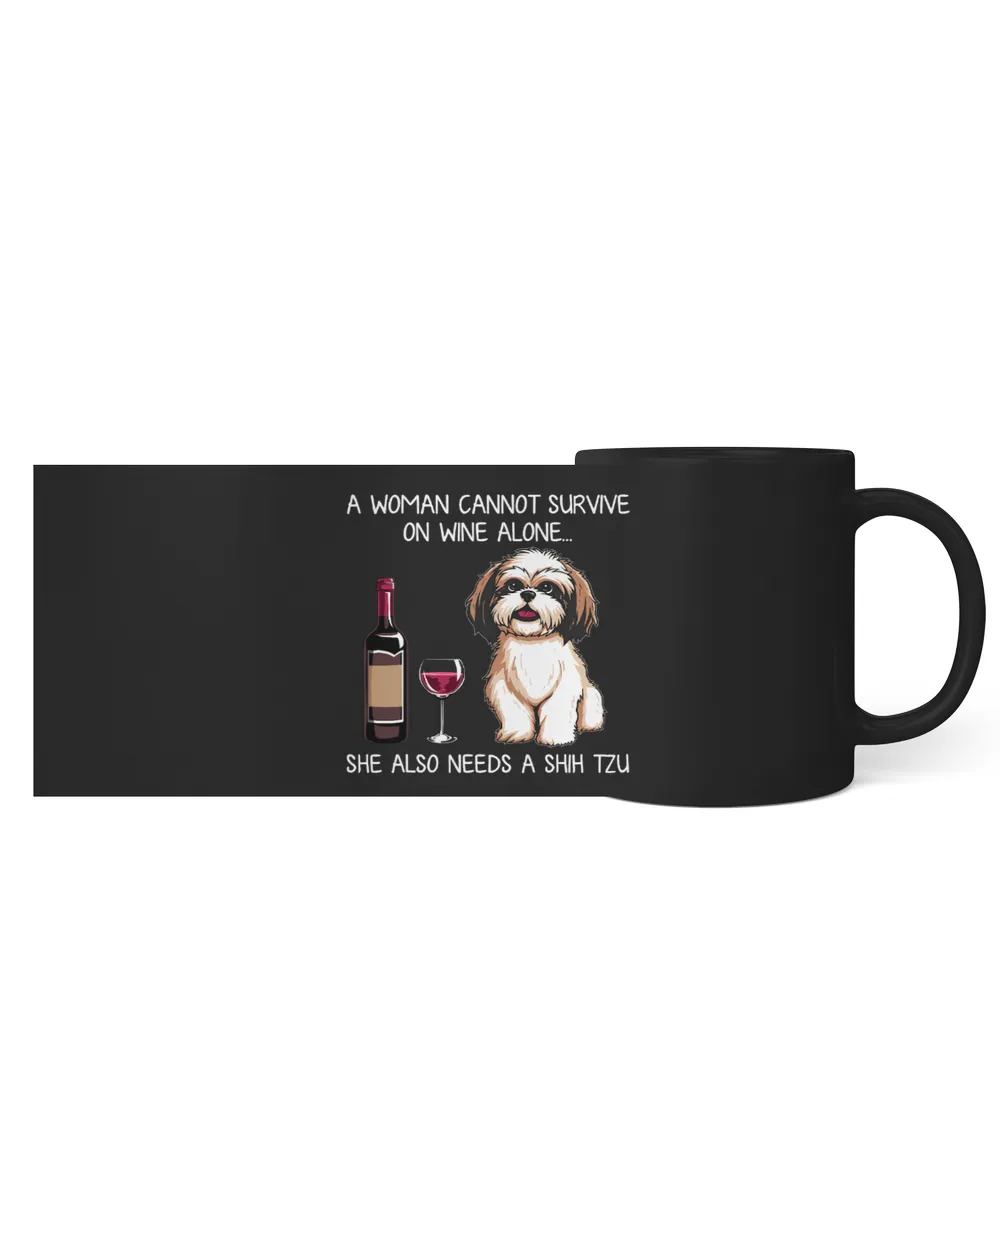 Woman Cant Survive Alone Needs Shih Tzu And Wine